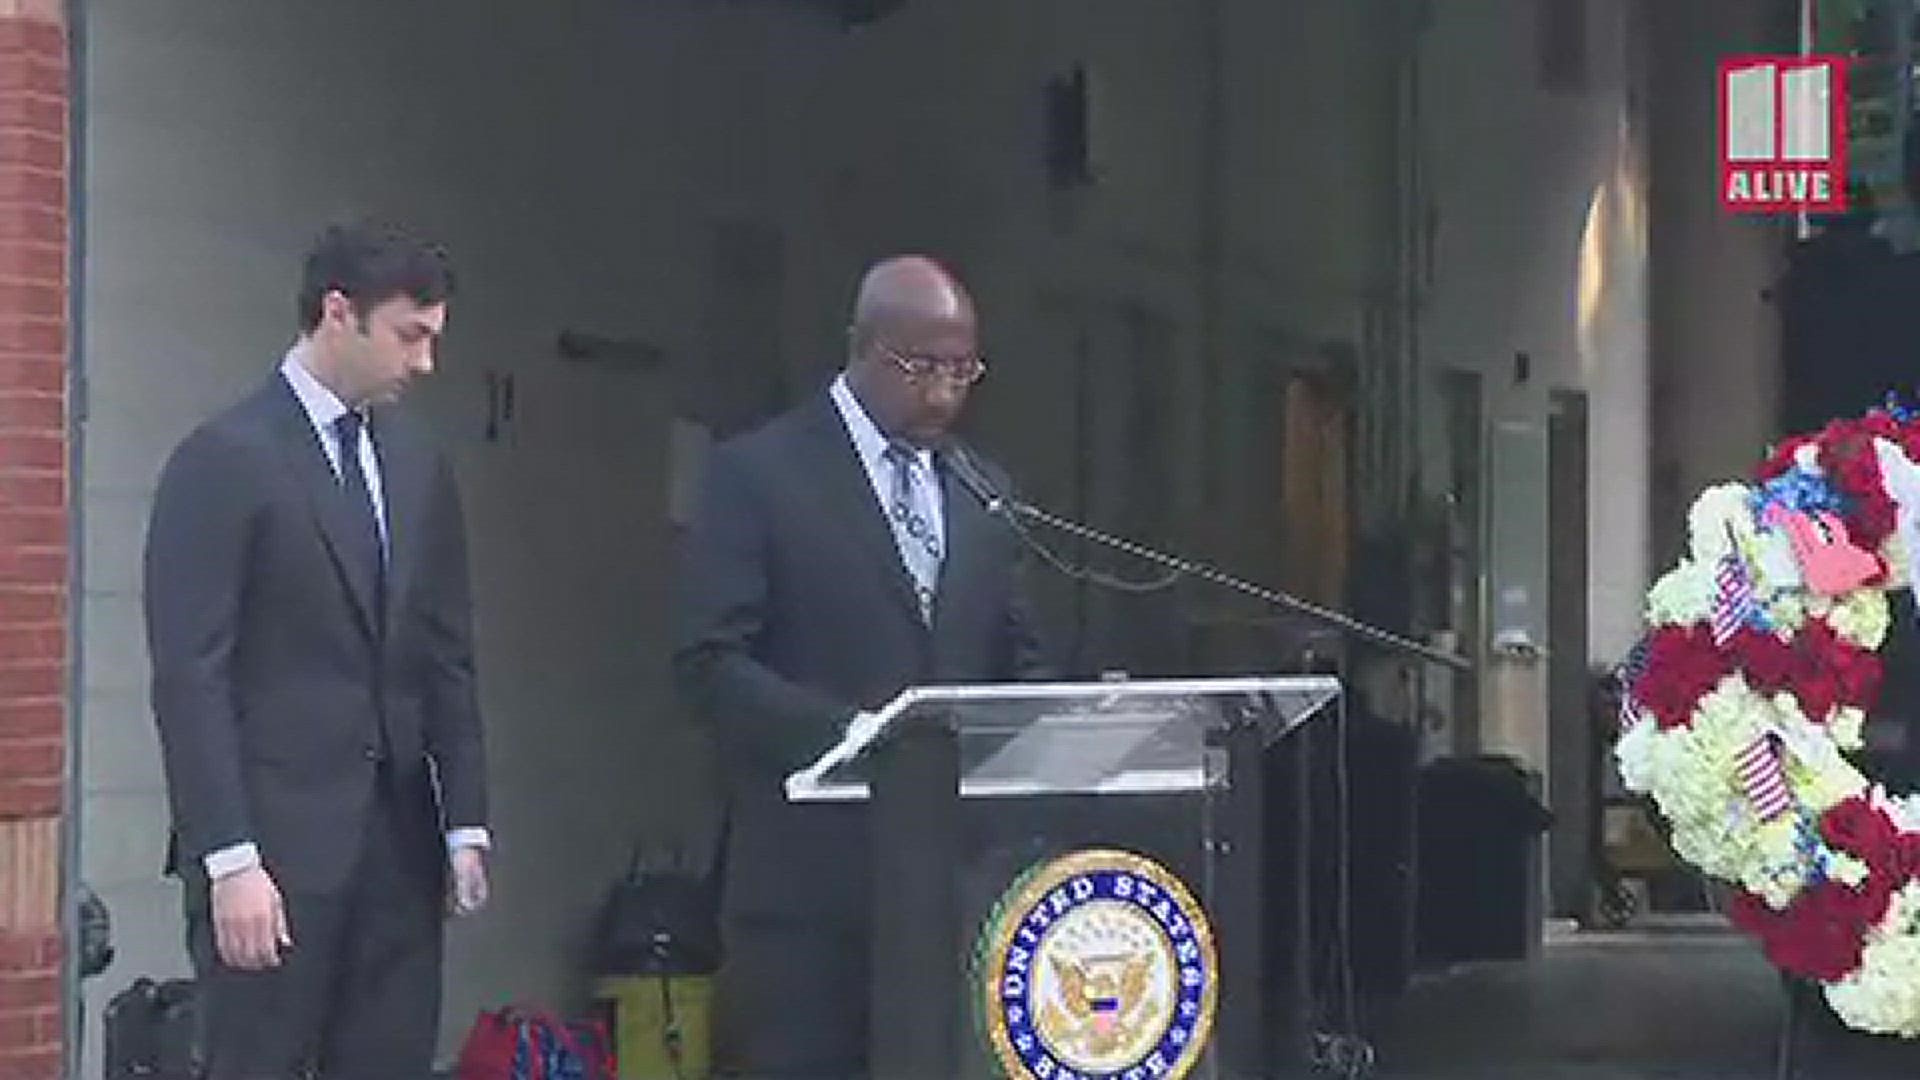 He and Sen. Jon Ossoff laid a wreath in honor of the victims of 9/11 on Saturday.